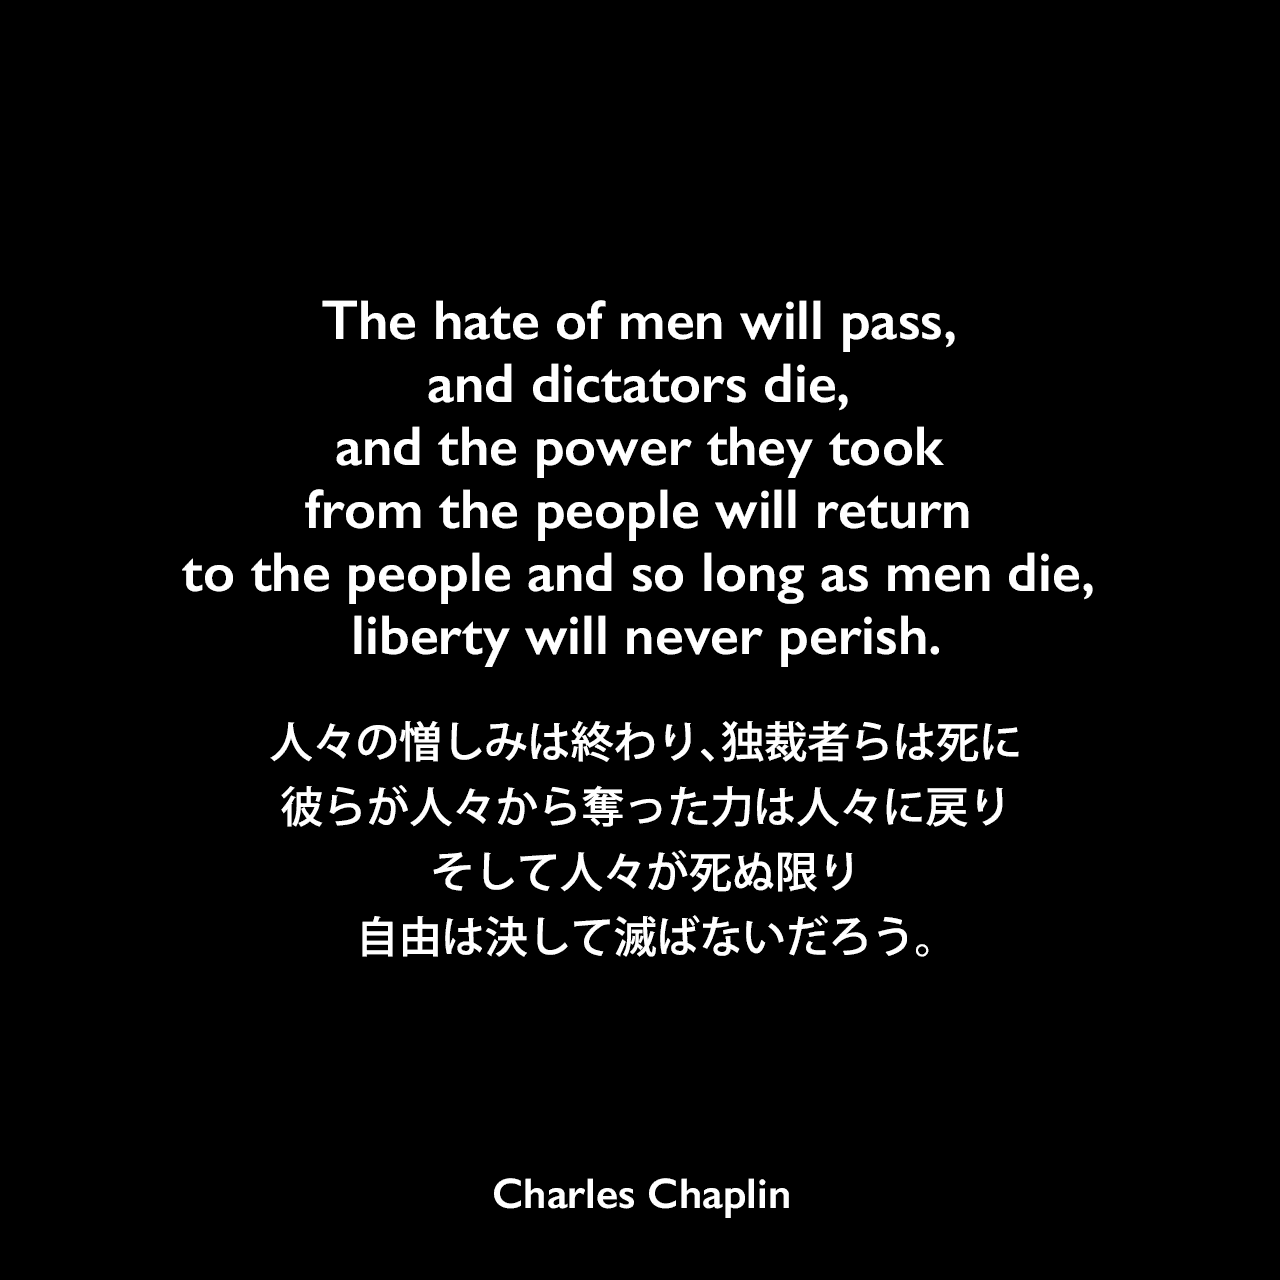 The hate of men will pass, and dictators die, and the power they took from the people will return to the people and so long as men die, liberty will never perish.人々の憎しみは終わり、独裁者らは死に、彼らが人々から奪った力は人々に戻り、そして人々が死ぬ限り、自由は決して滅ばないだろう。Charles Chaplin